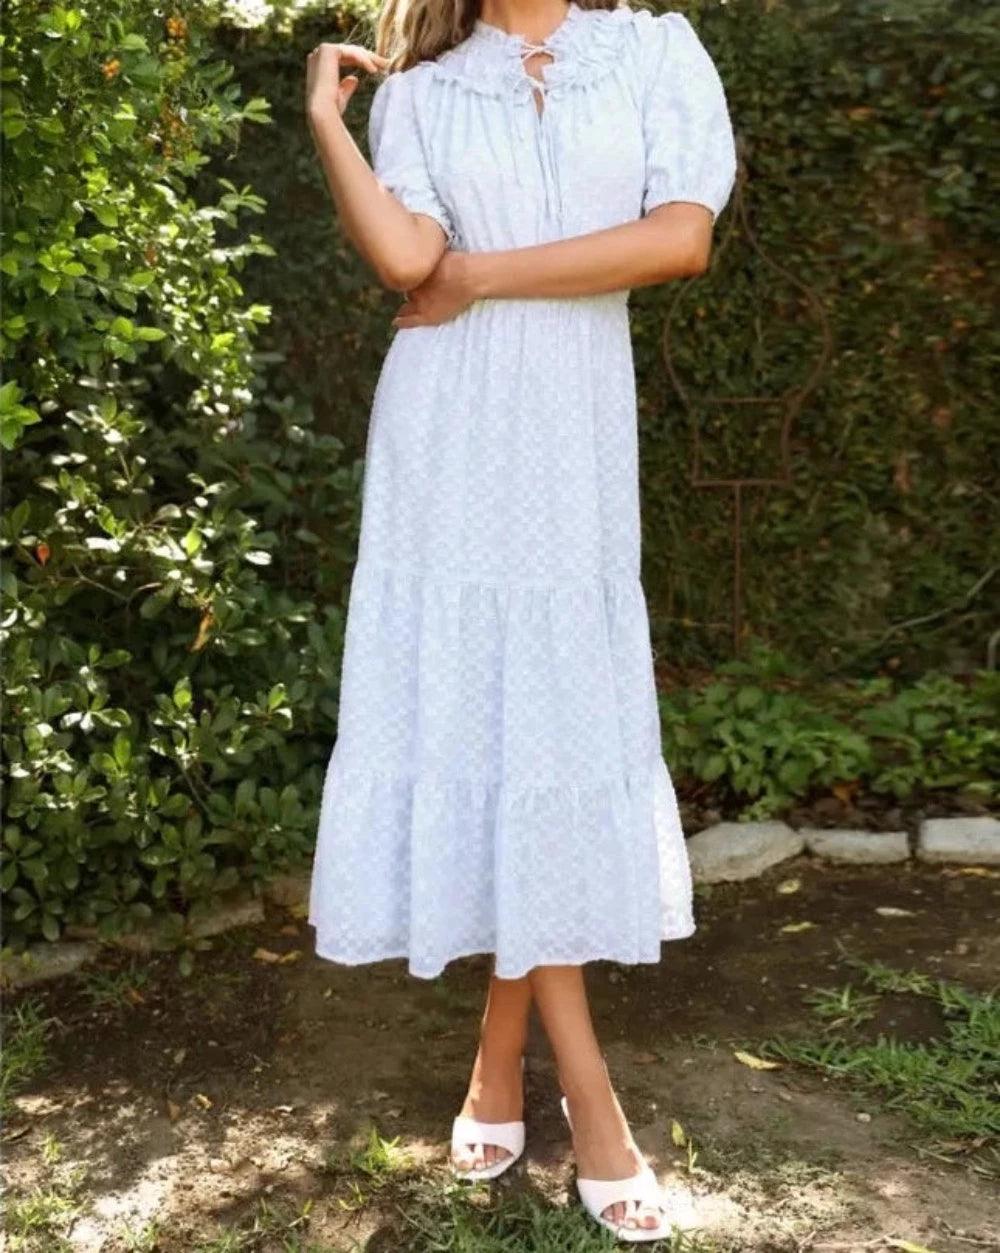 Model wearing Adelyn Rae's Darlene Burnout Chiffon Smocked Midi Dress in light blue, featuring a delicate burnout pattern, ruffled neckline, and a comfortable smocked waist, perfect for a stylish outdoor gathering - BTK COLLECTION